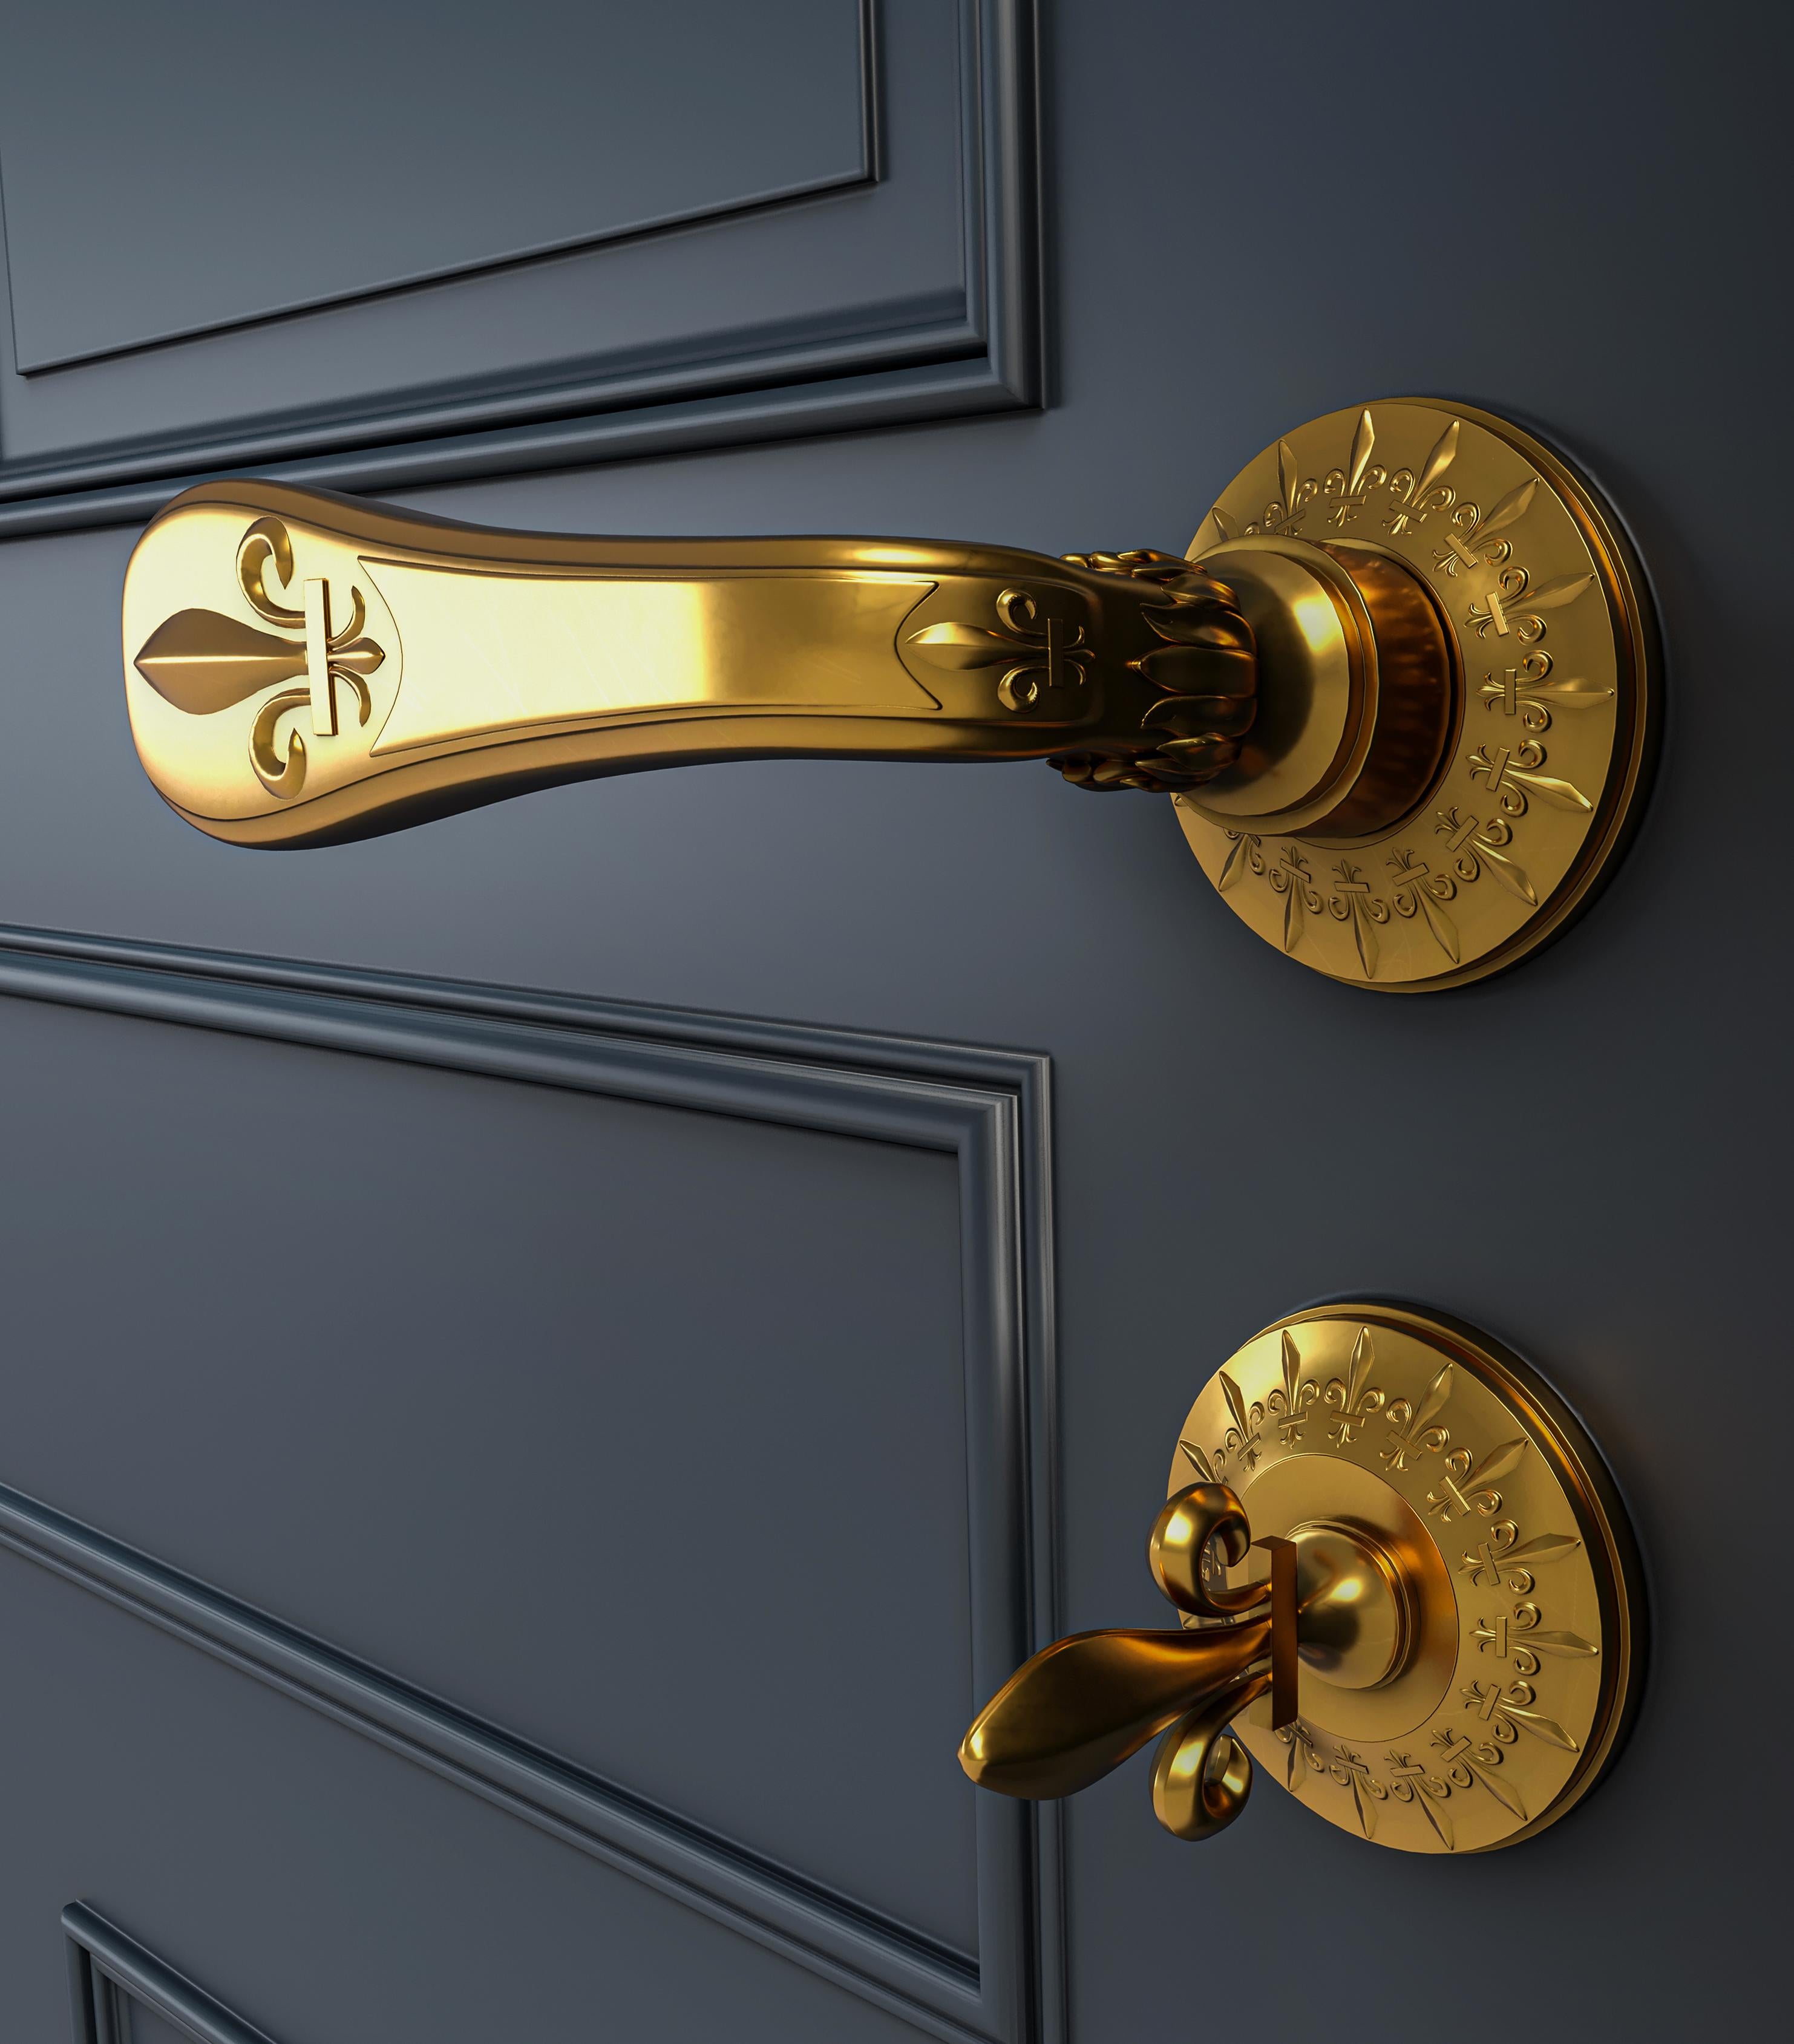 Magnificent Versailles Fleur de Lys condemned door handle 
collection Jerome Bugara Editions.

Handcrafted by Bronzier d'art Remy Garnier.

In satin-finish natural brass. 
